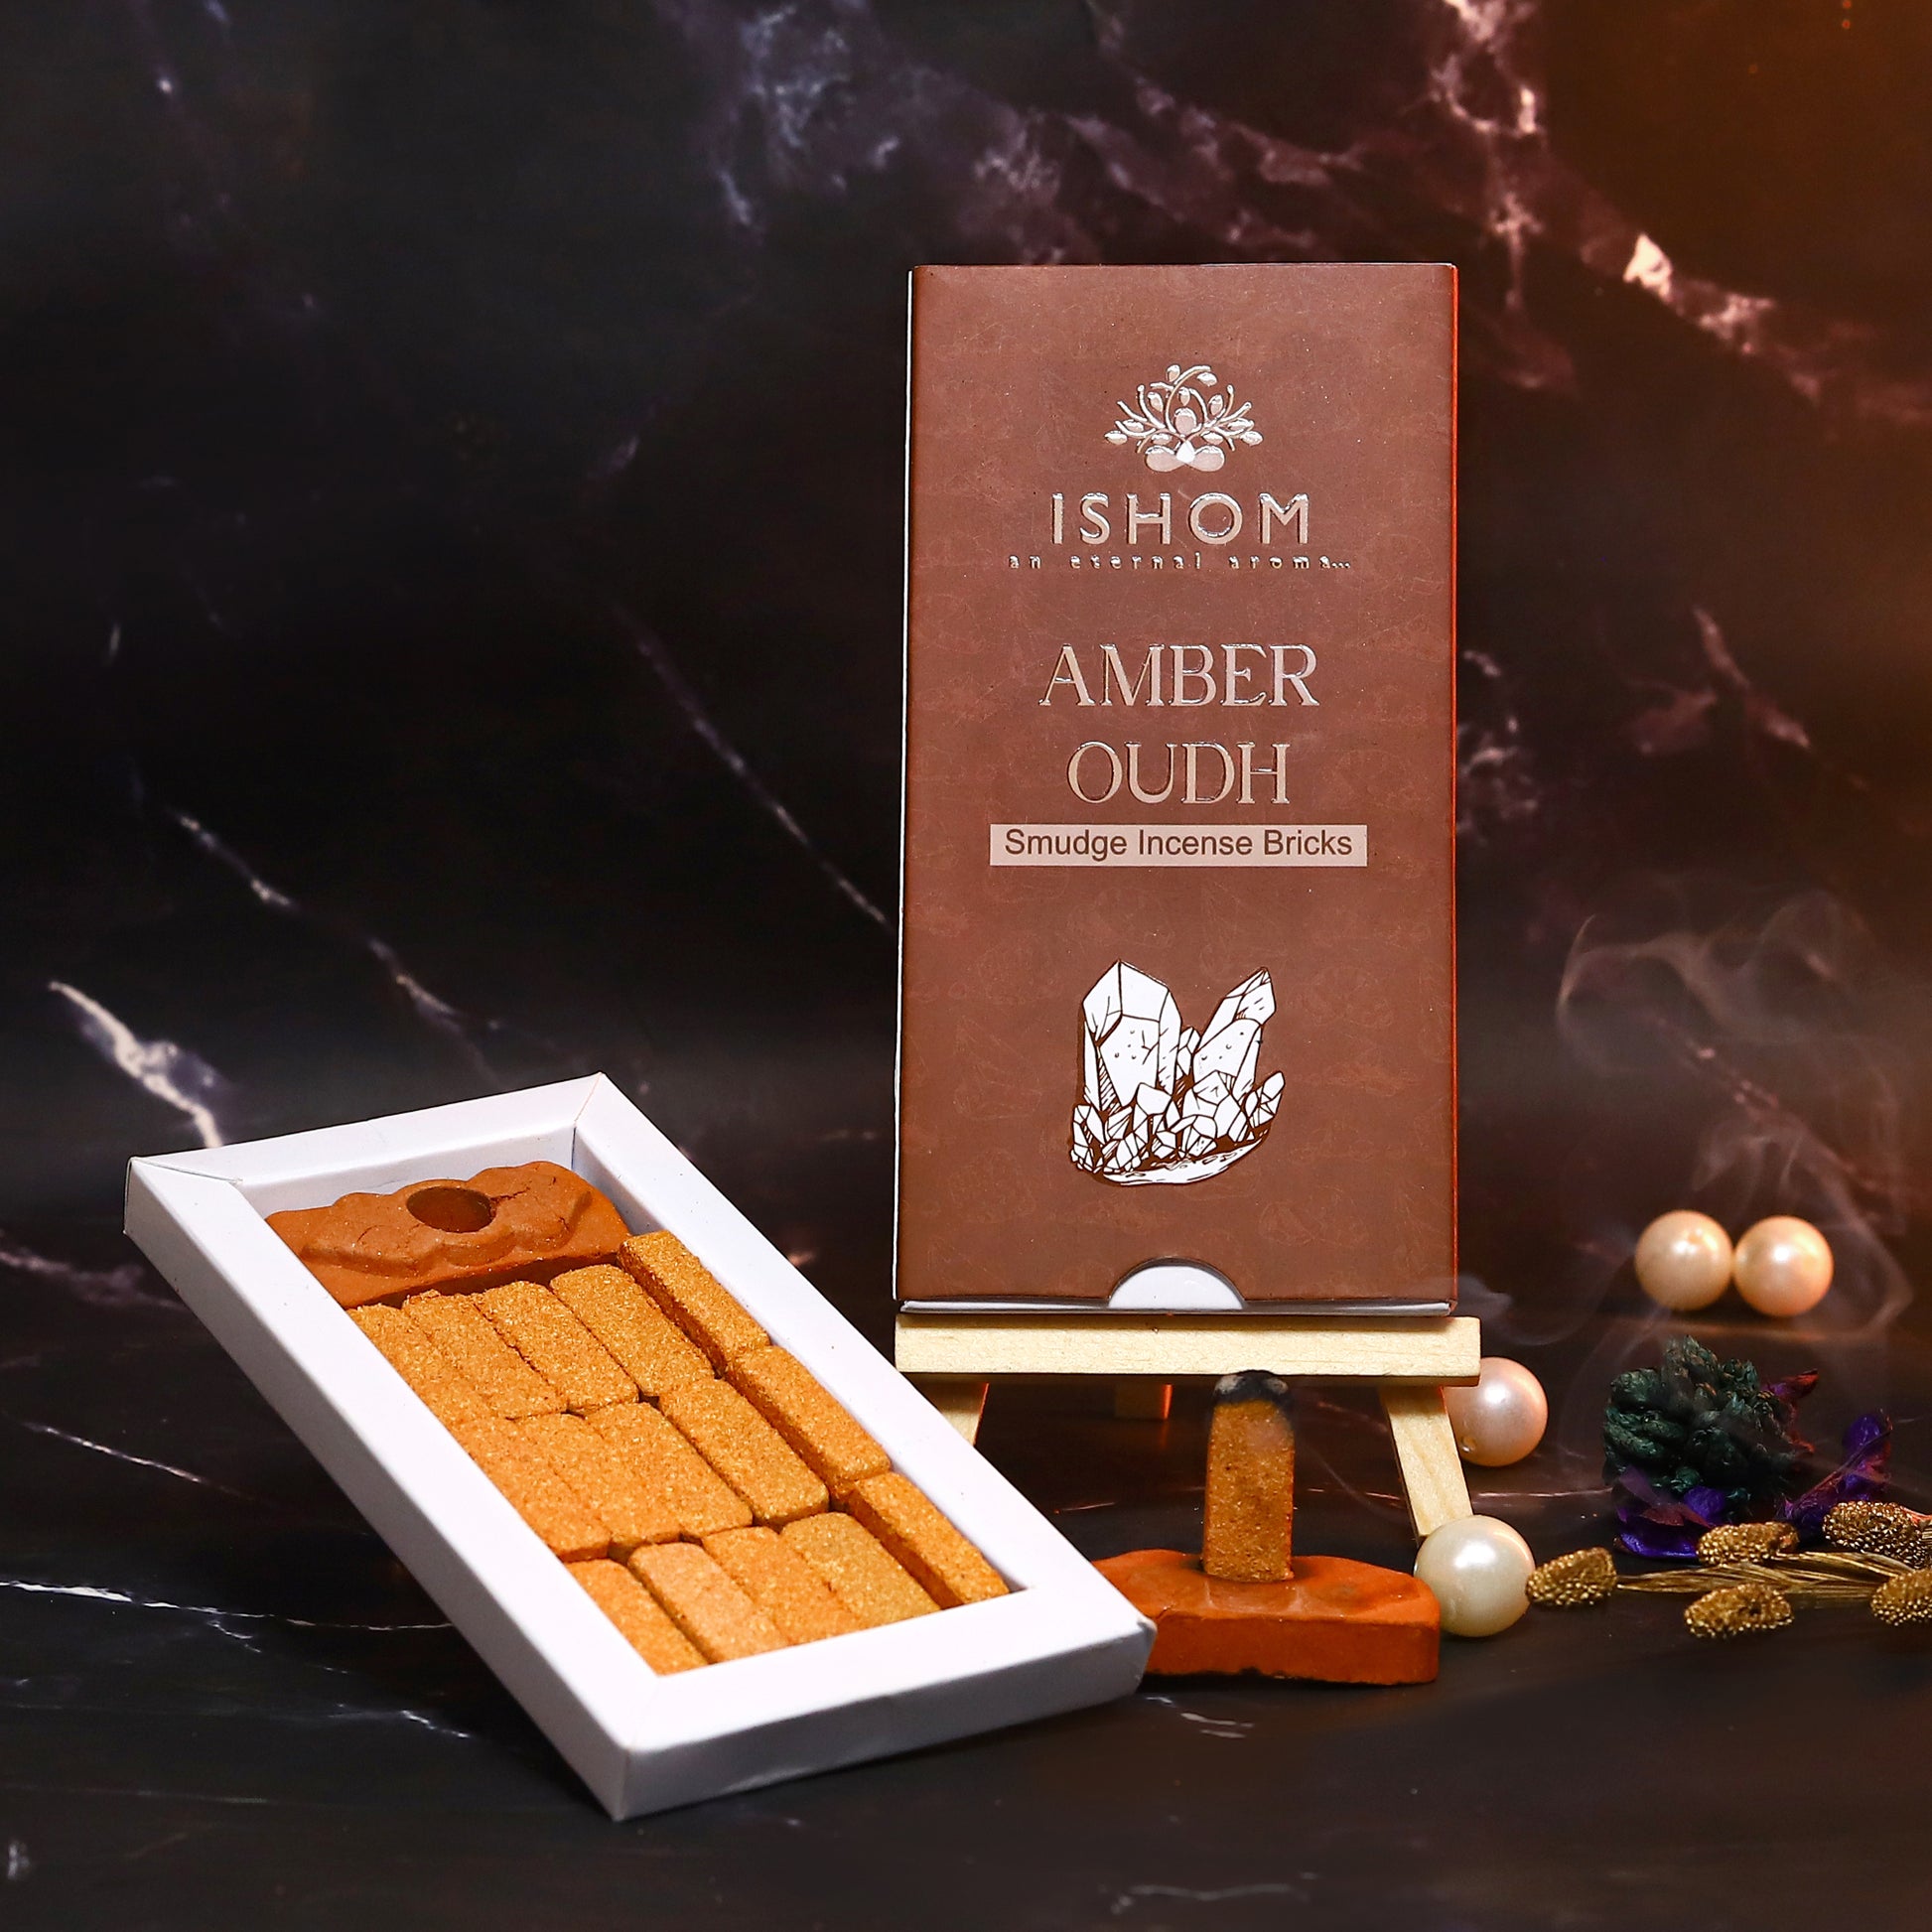 Amber Oudh Smudge Incense Bricks (Pack of 12)